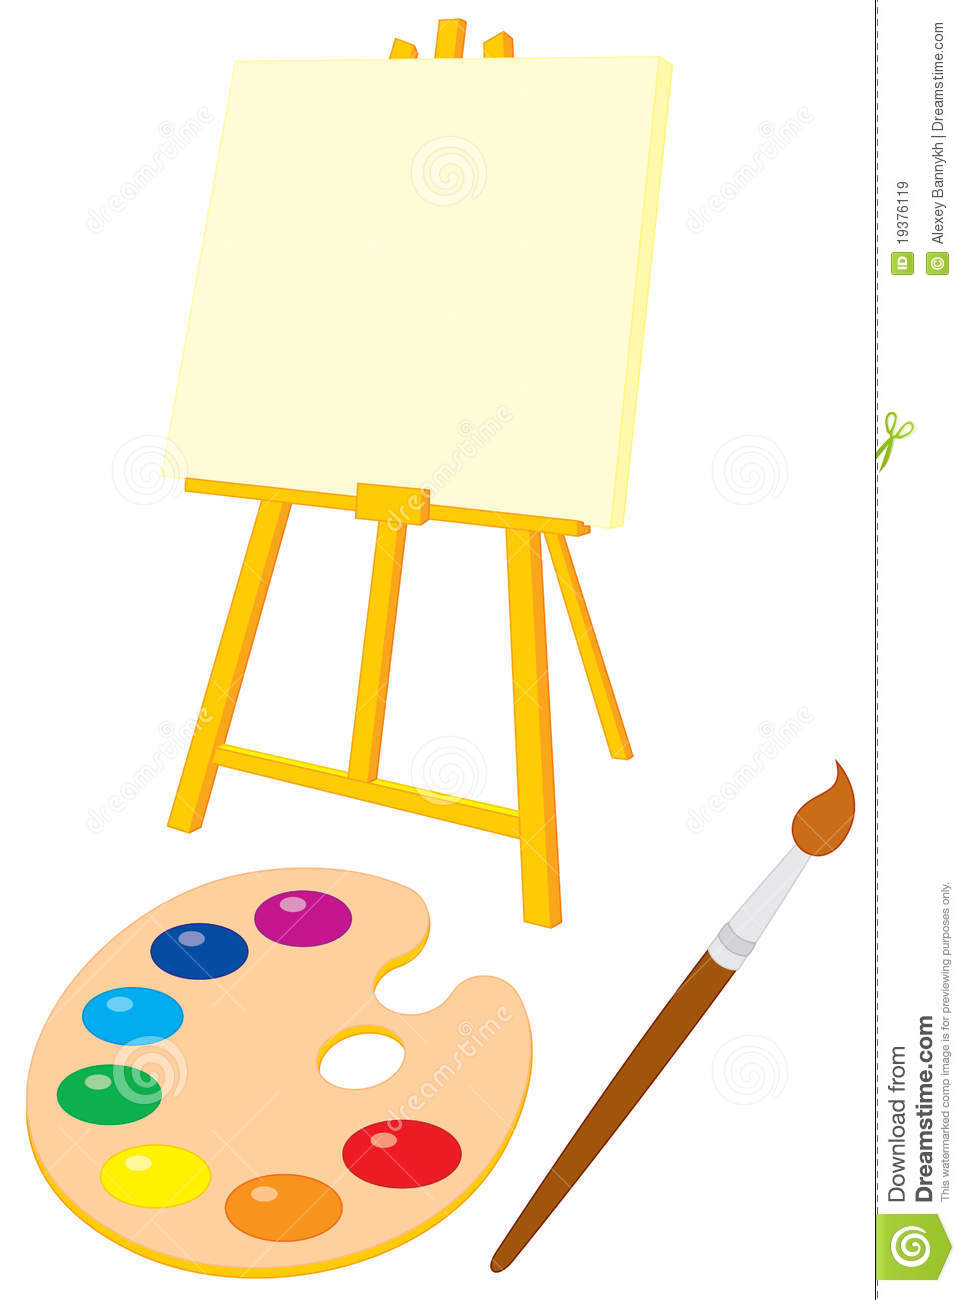 Clip Arts Of An Easel Palette With Paints And Brush For Painting